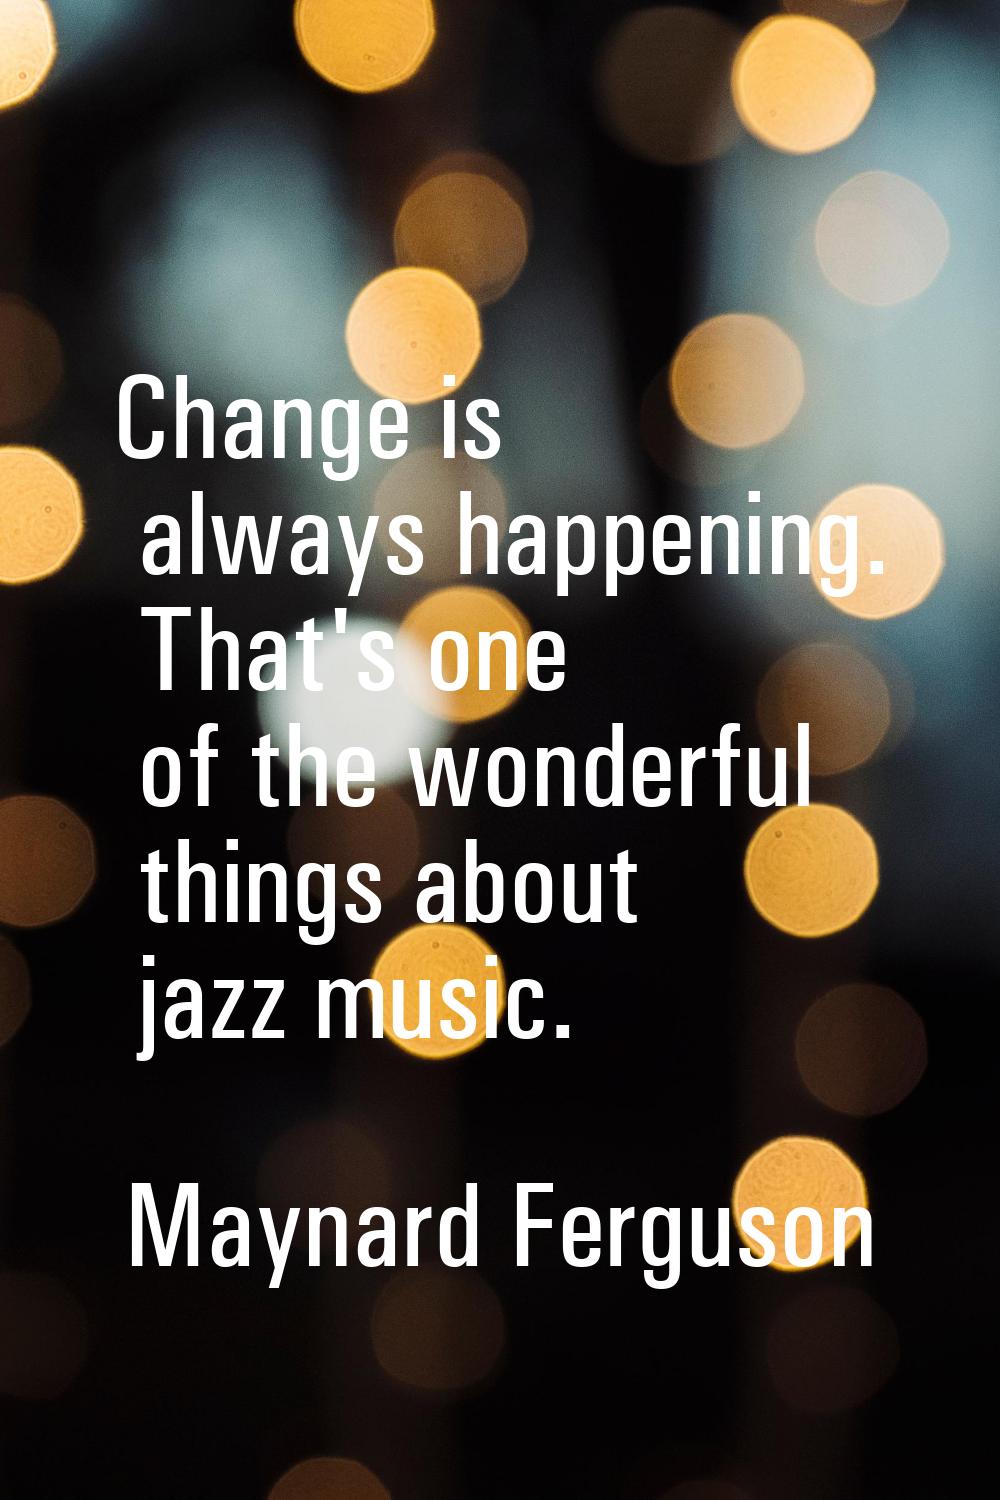 Change is always happening. That's one of the wonderful things about jazz music.